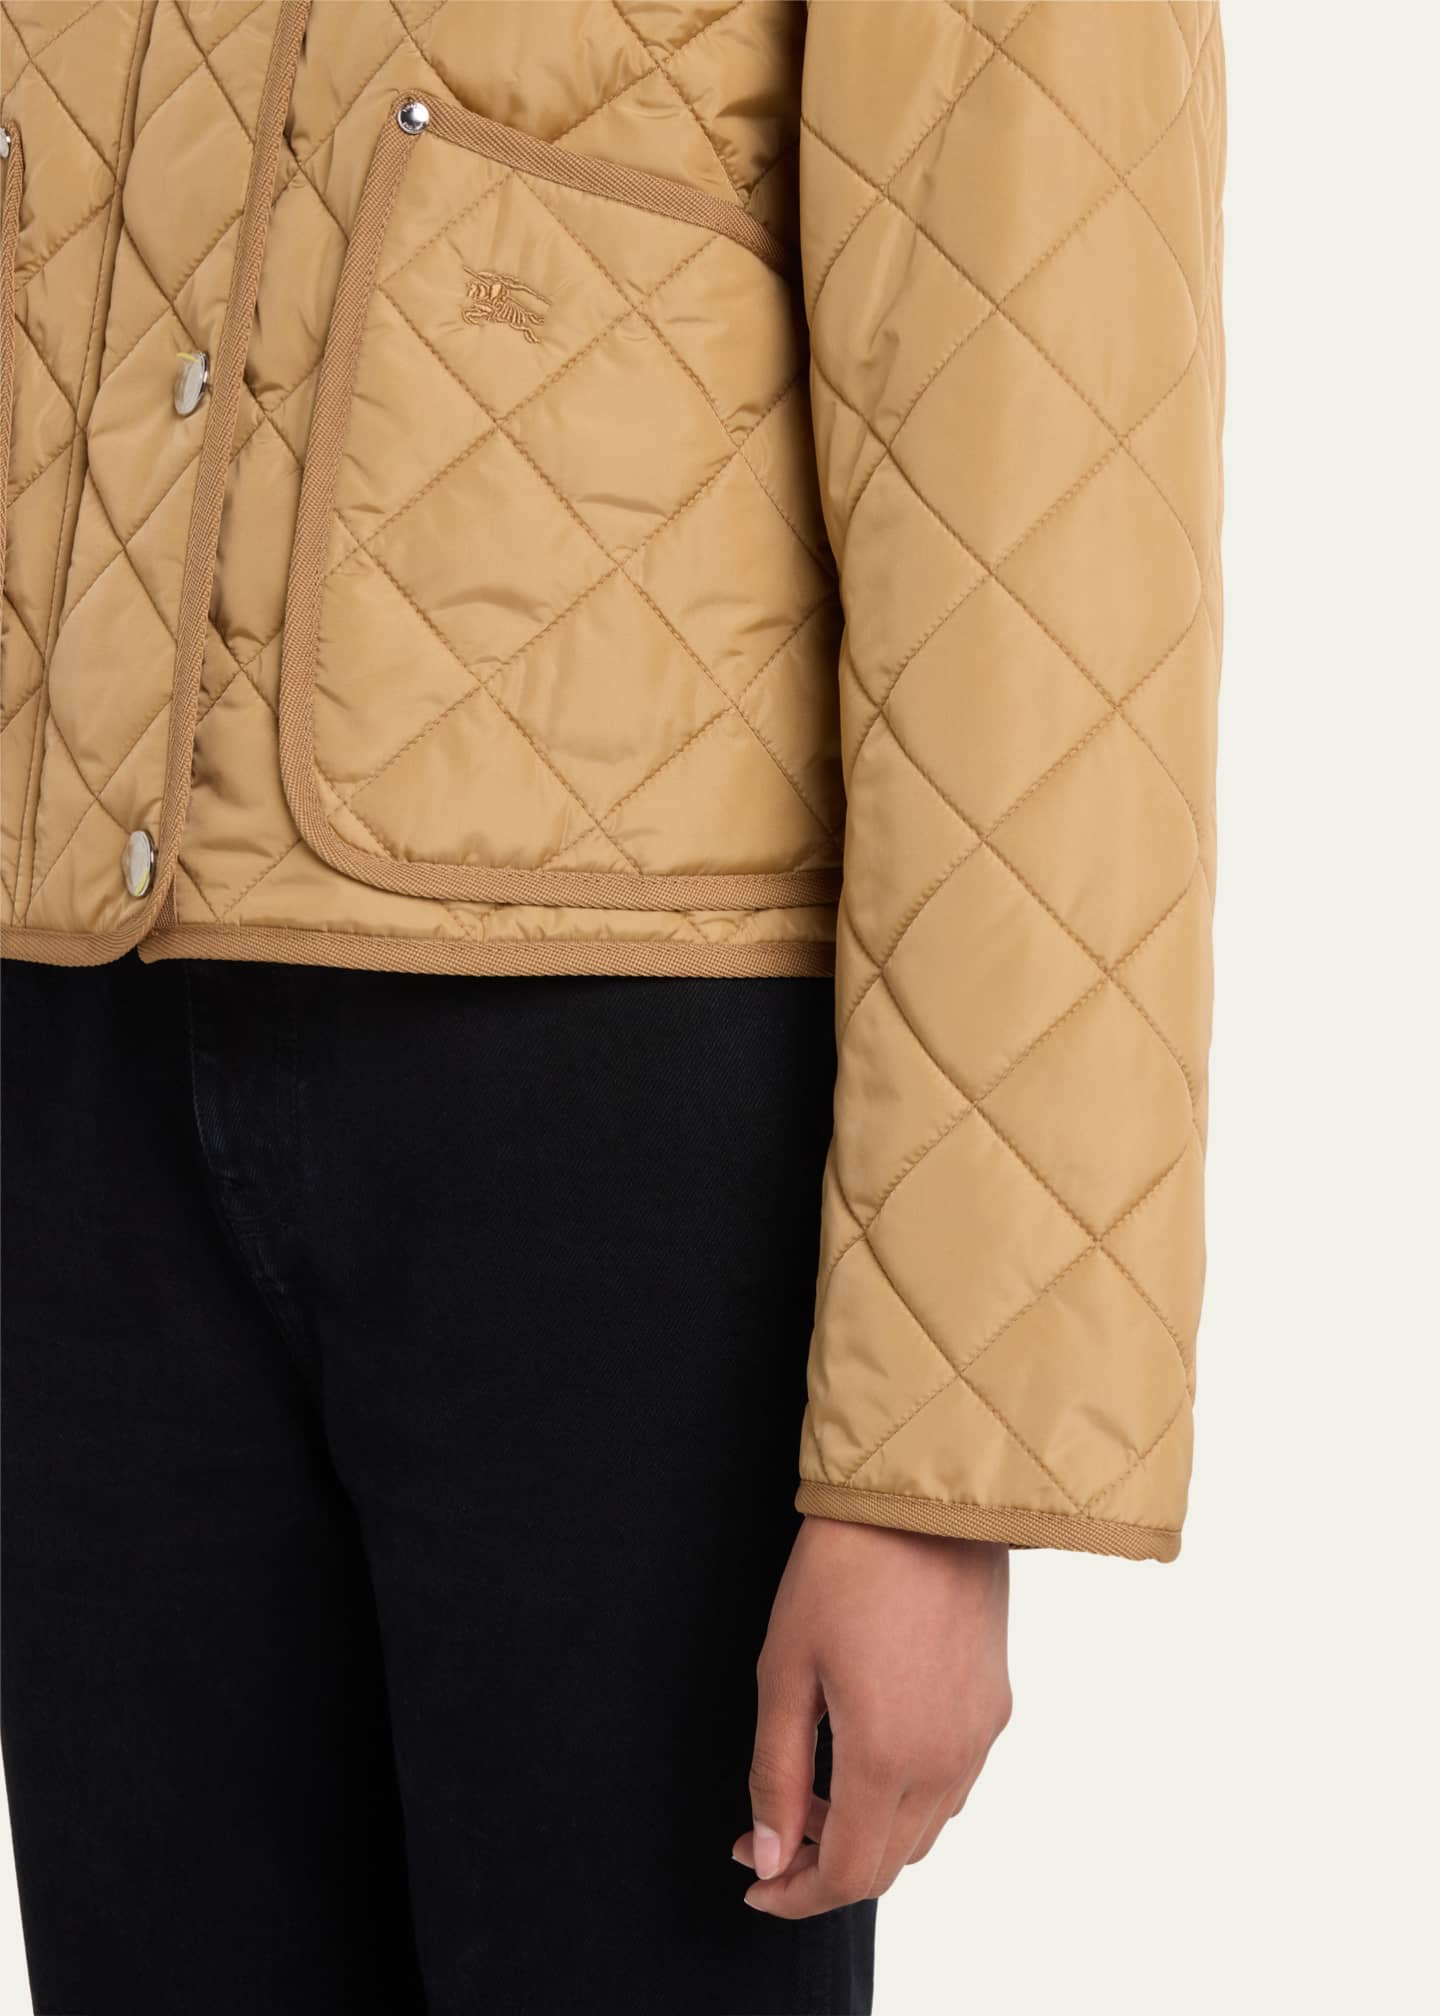 Burberry Humbie Quilted Short Jacket with Removable Hood